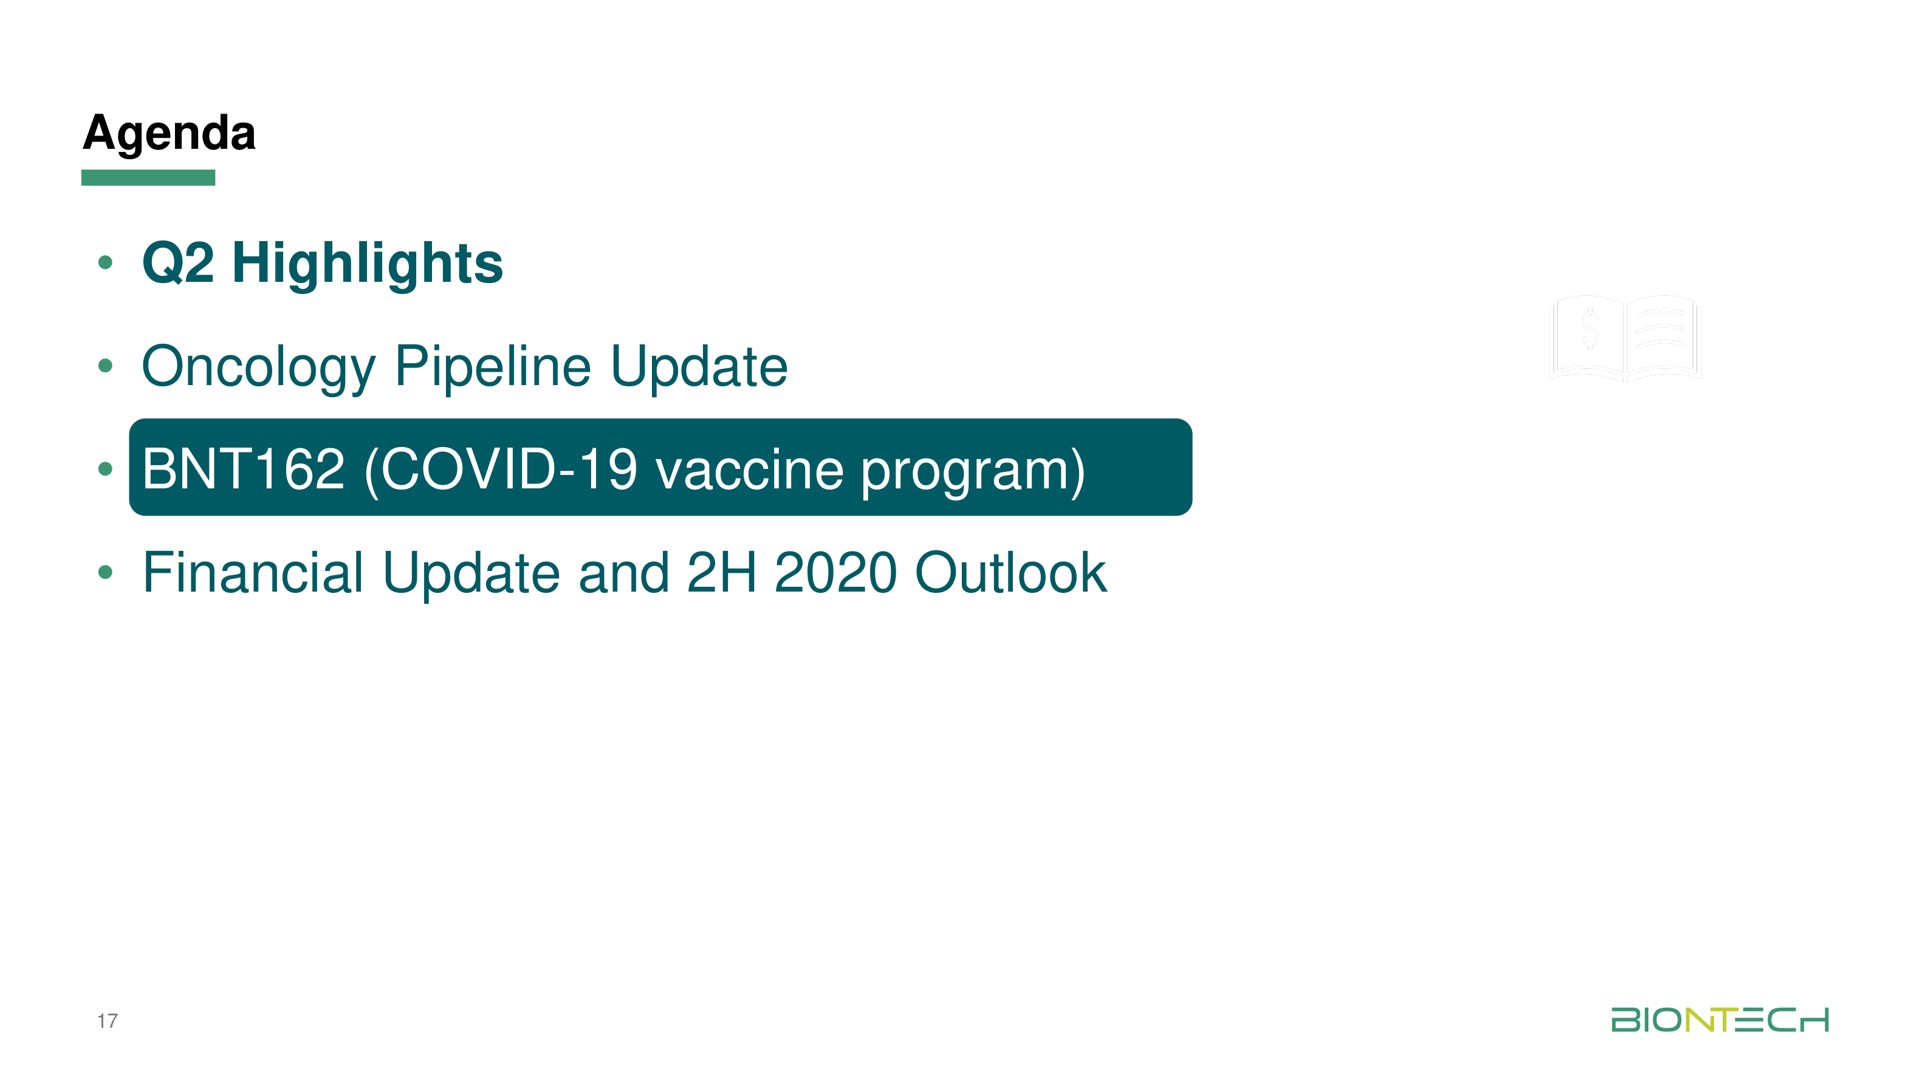 agenda highlights oncology pipeline update covid vaccine program financial update and outlook | BioNTech